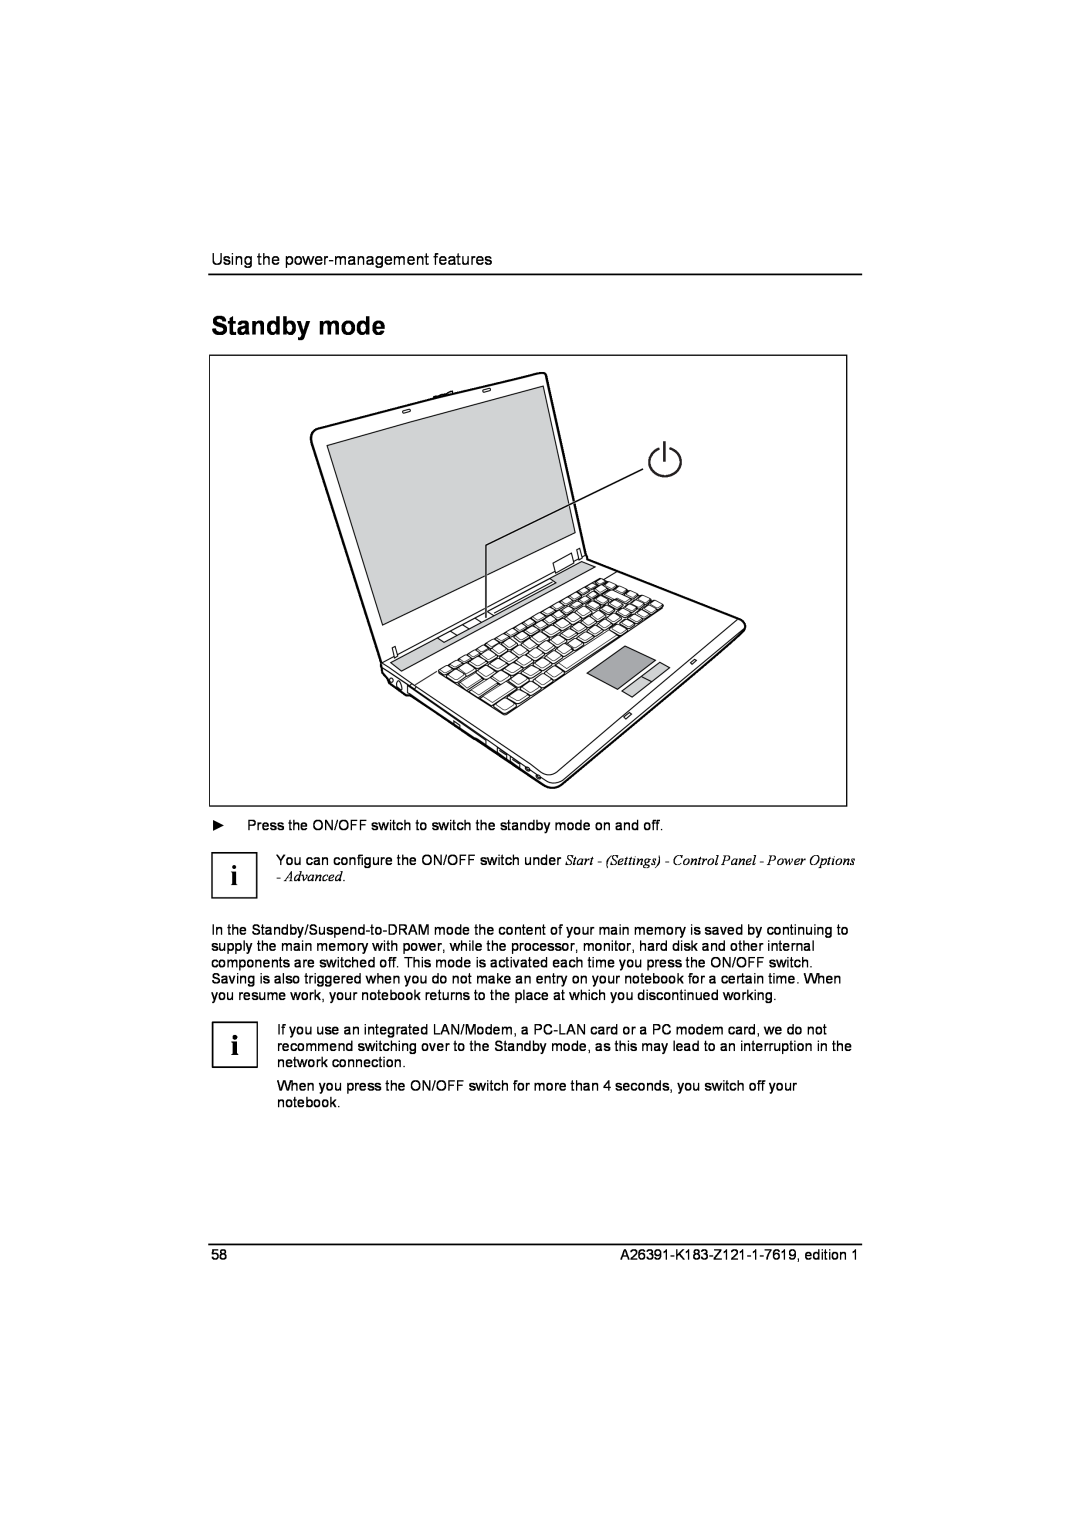 Fujitsu Siemens Computers V2035 manual Standby mode, Using the power-management features, i - Advanced 